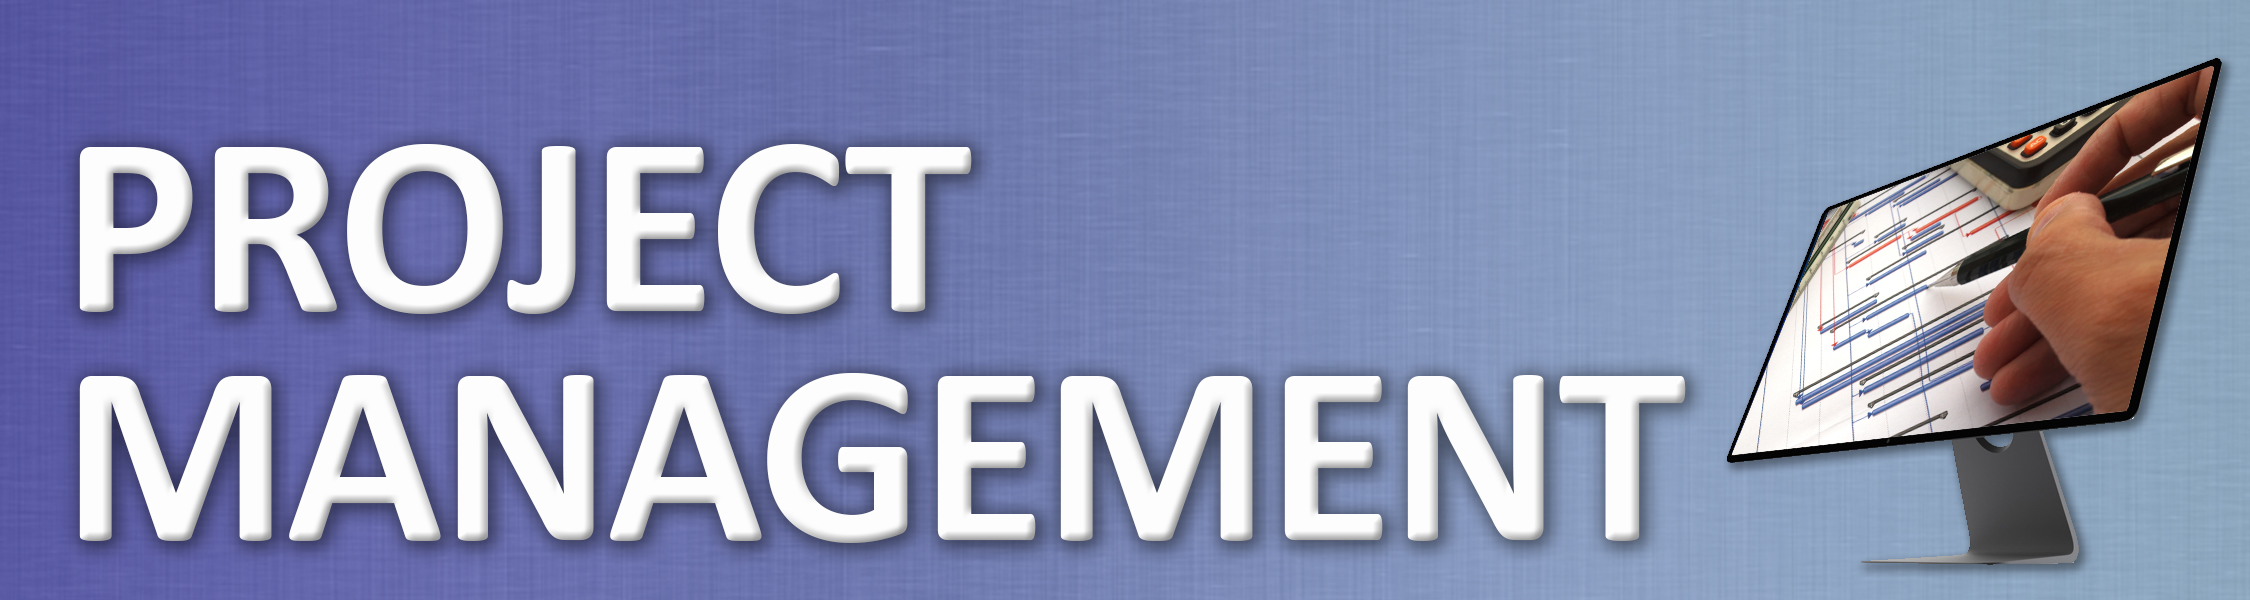 pROJECT mgmt header 3